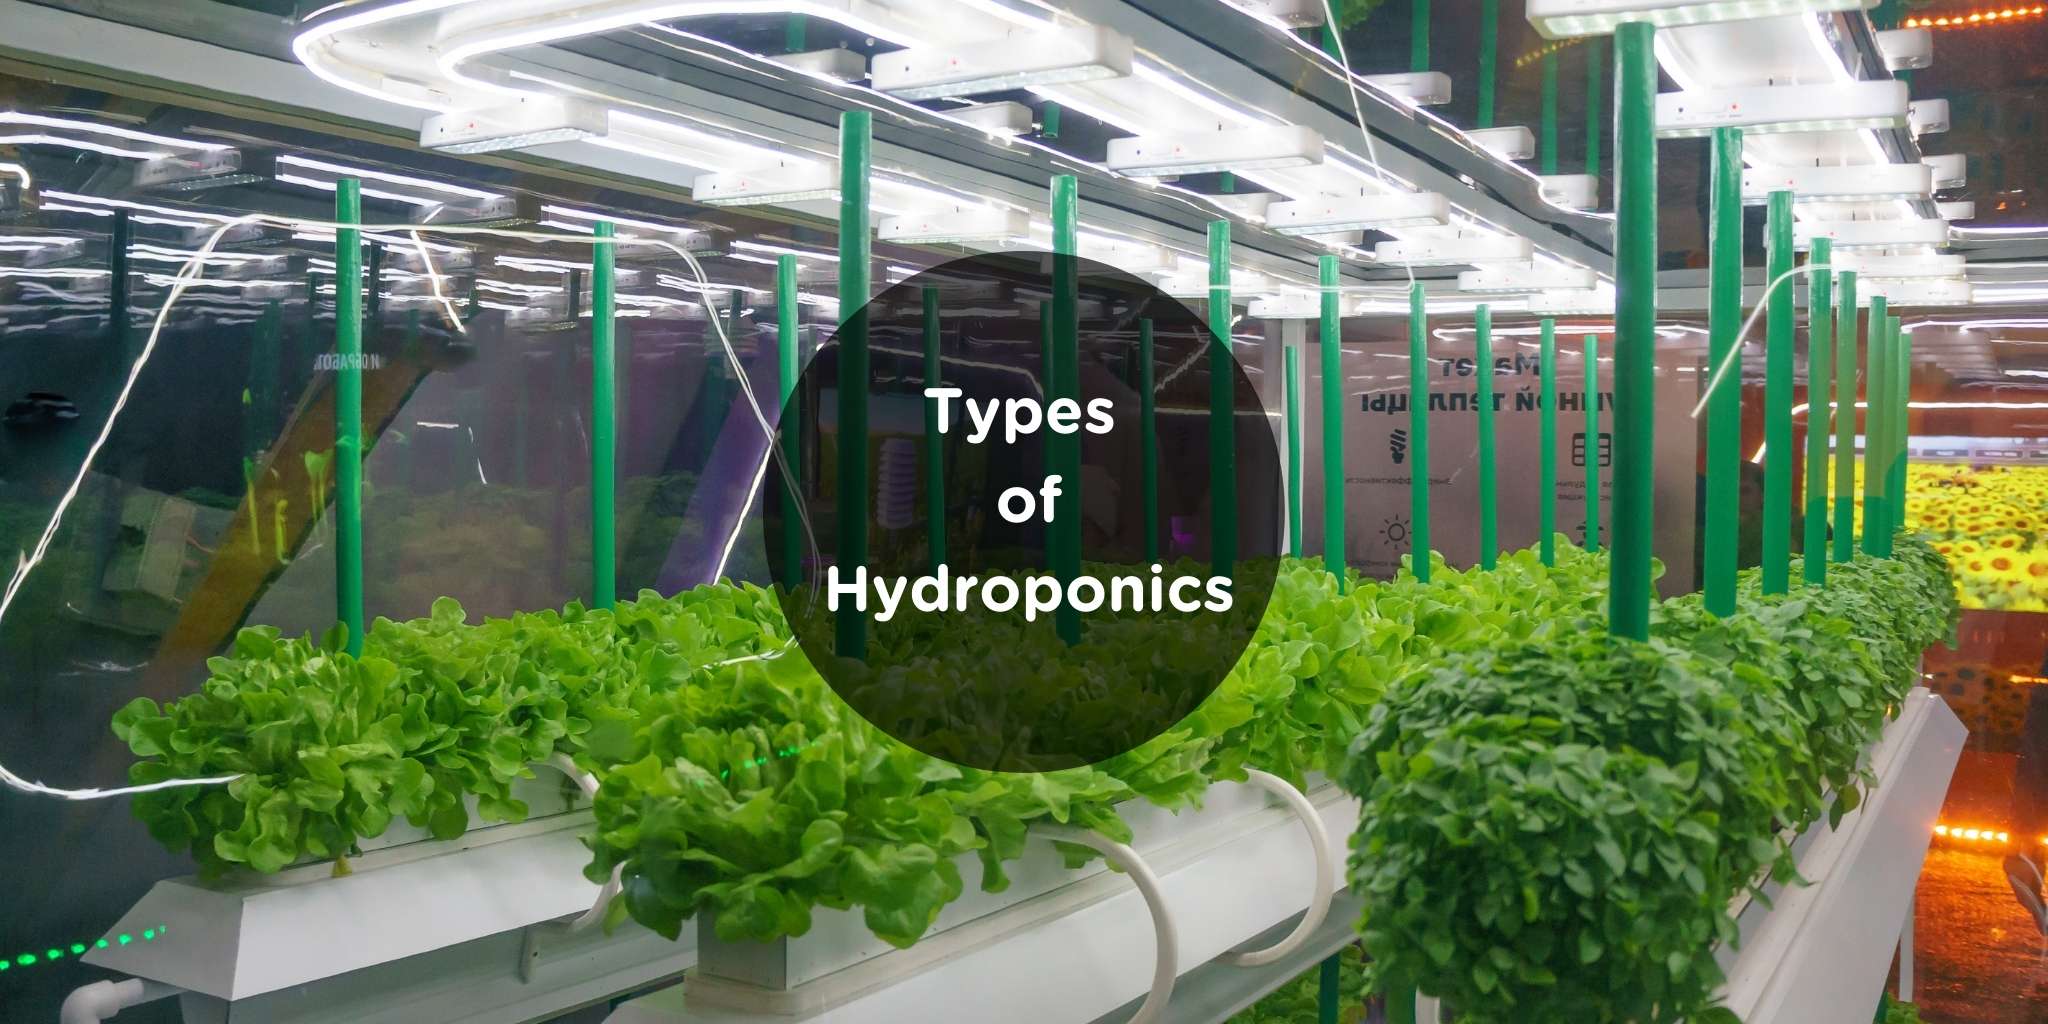 types of hydroponics systems